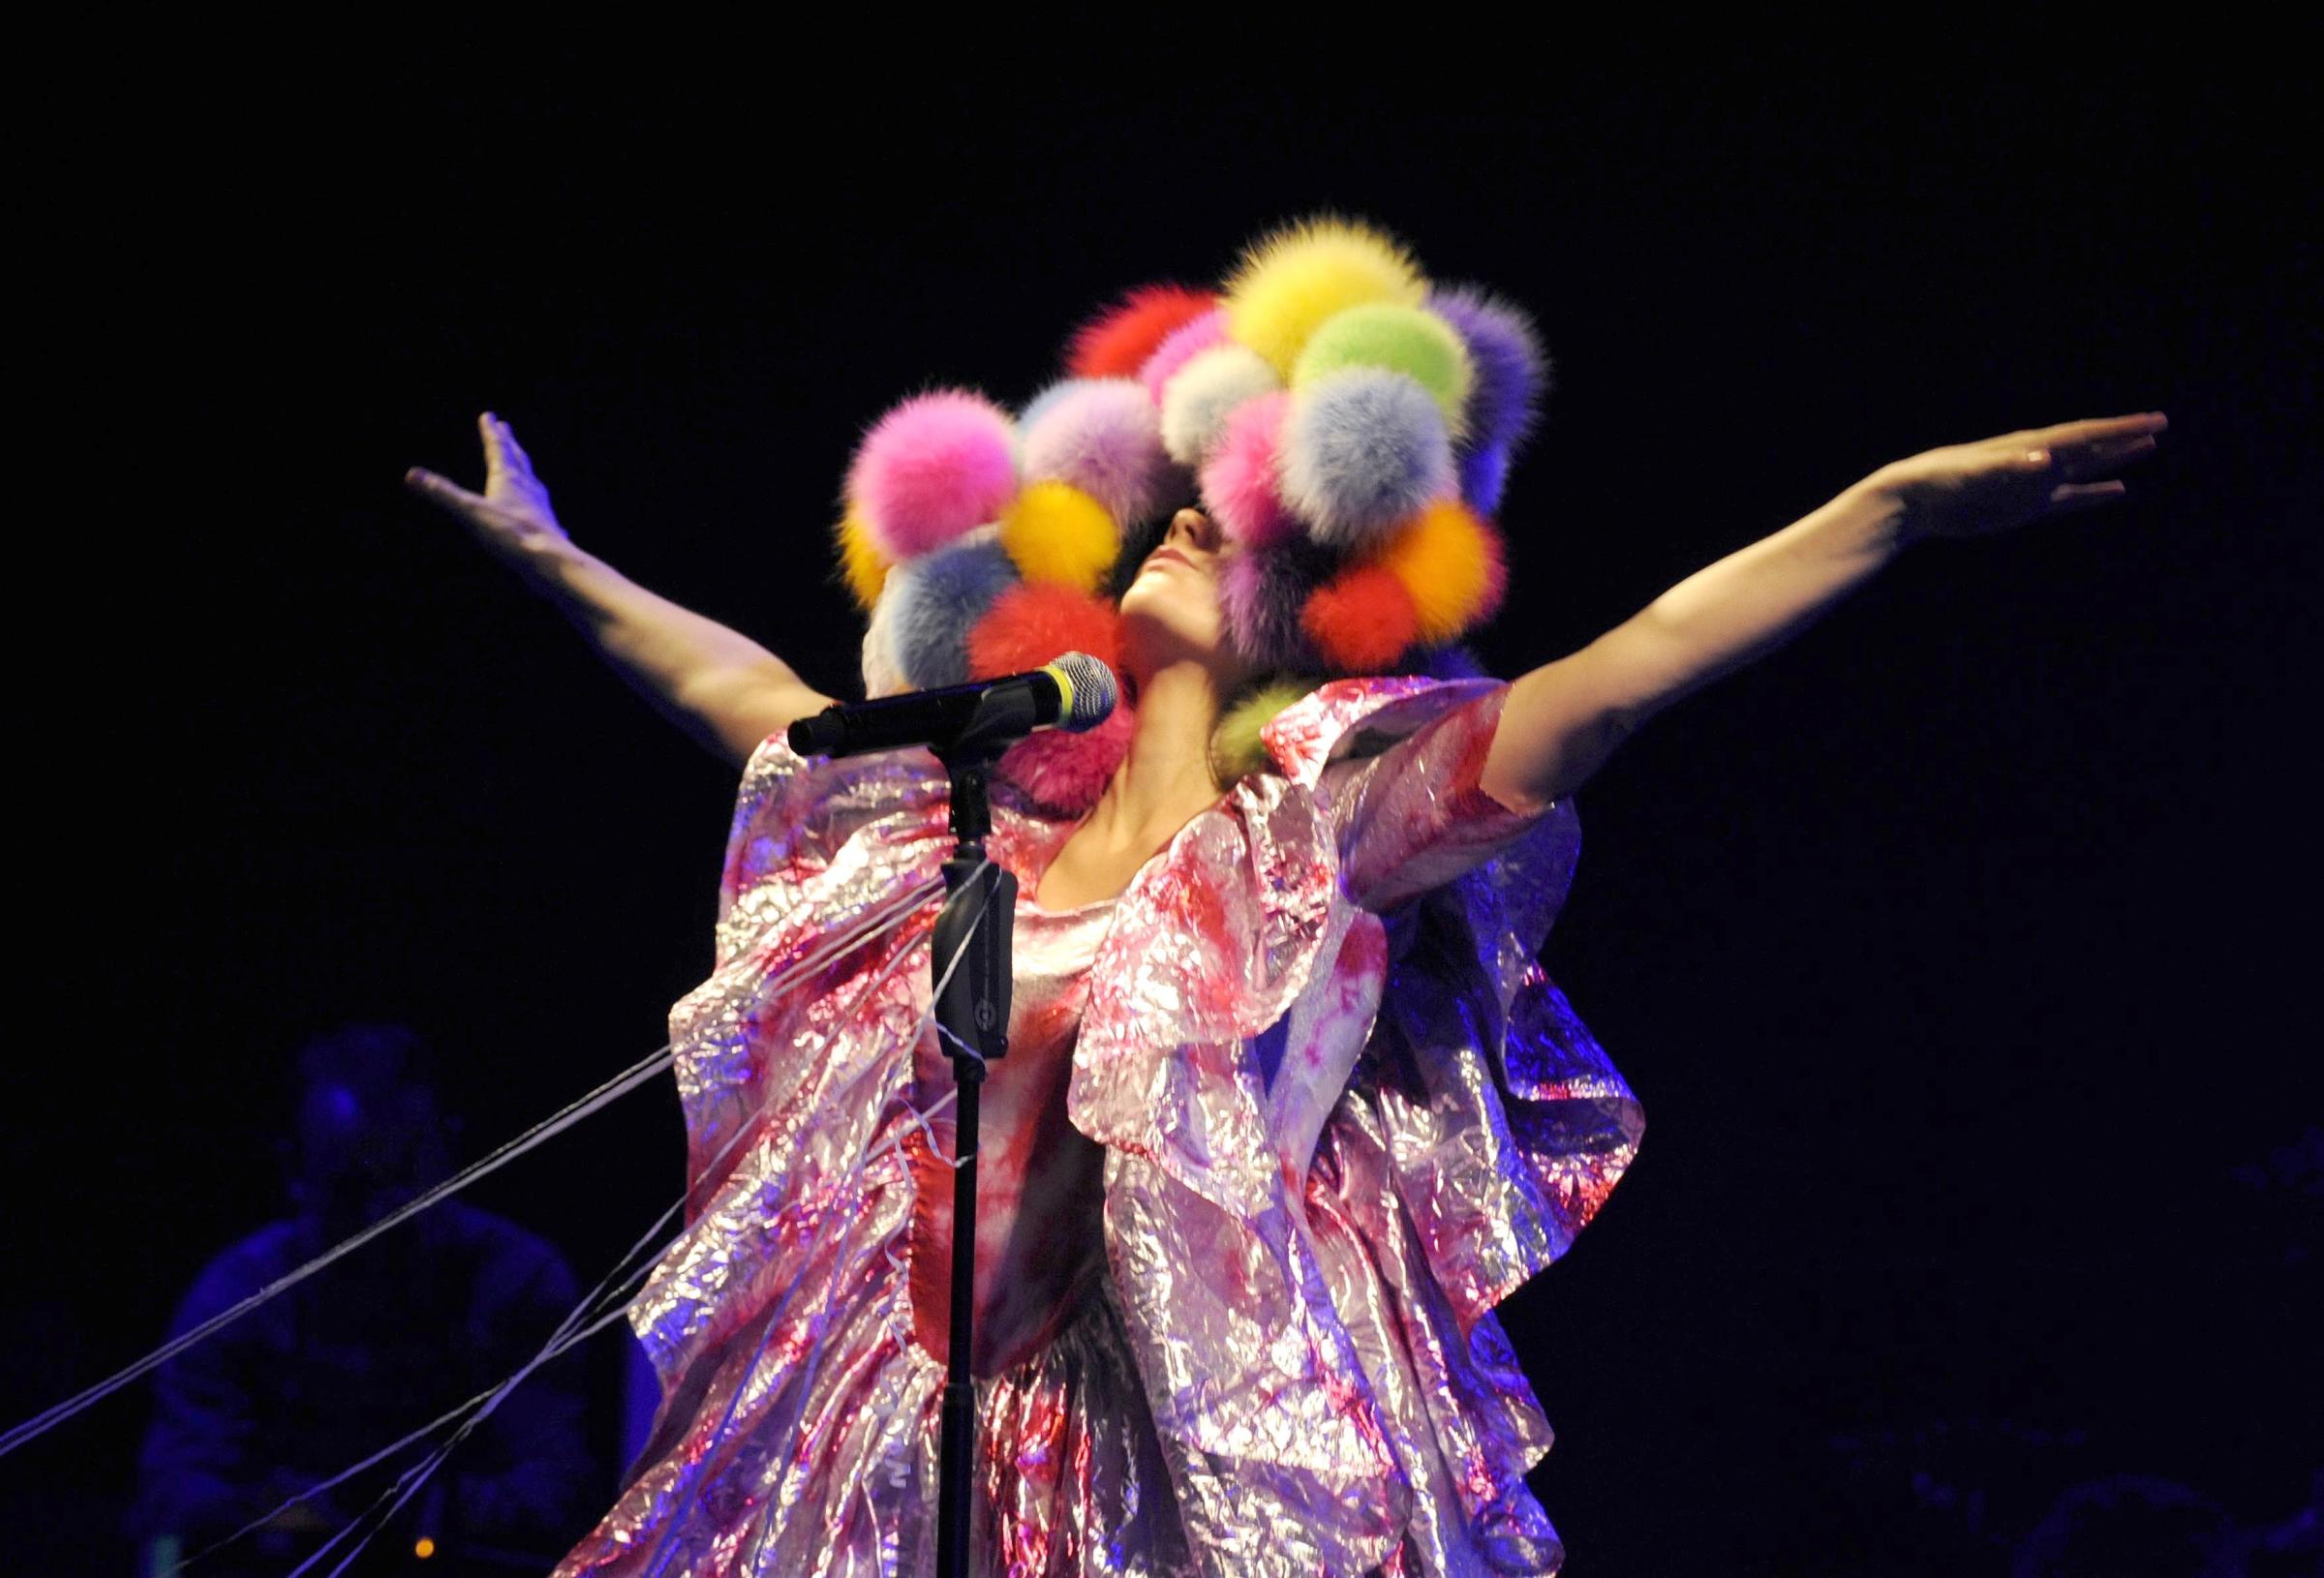 Bjork performs at Hammersmith Apollo in London on April 14, 2008.